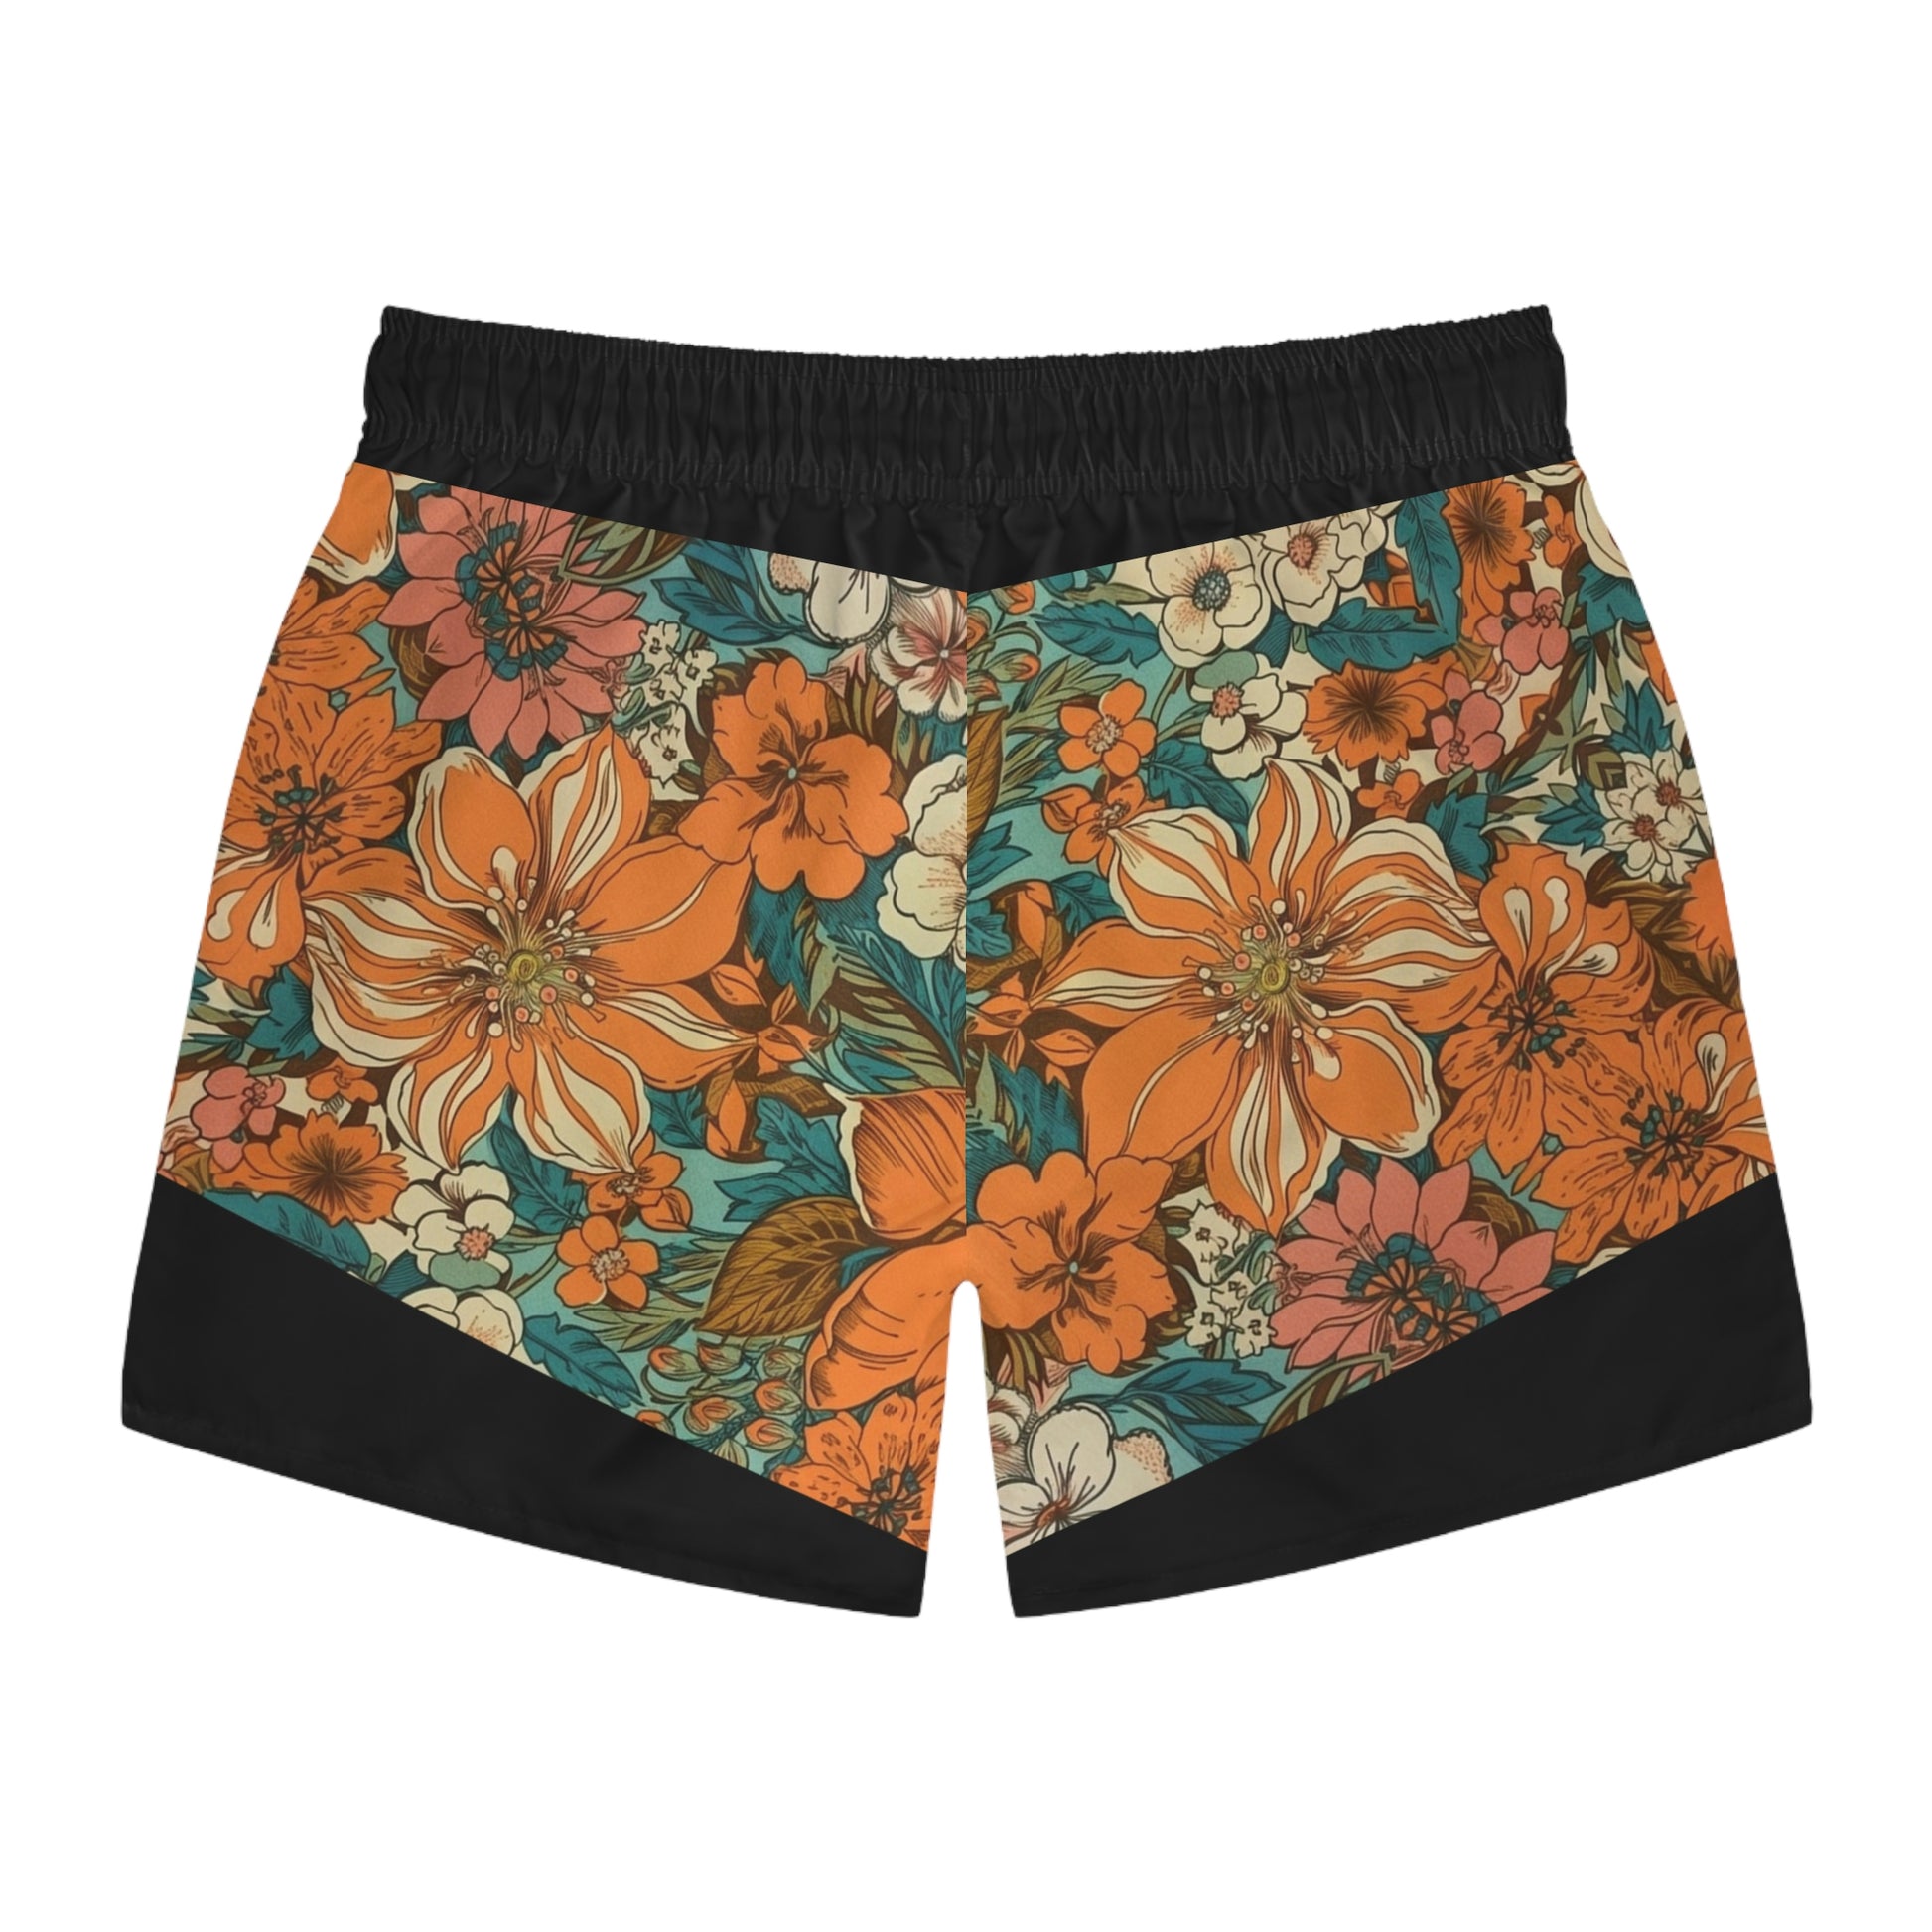 Two-Tone Vacationeer Trunks Black